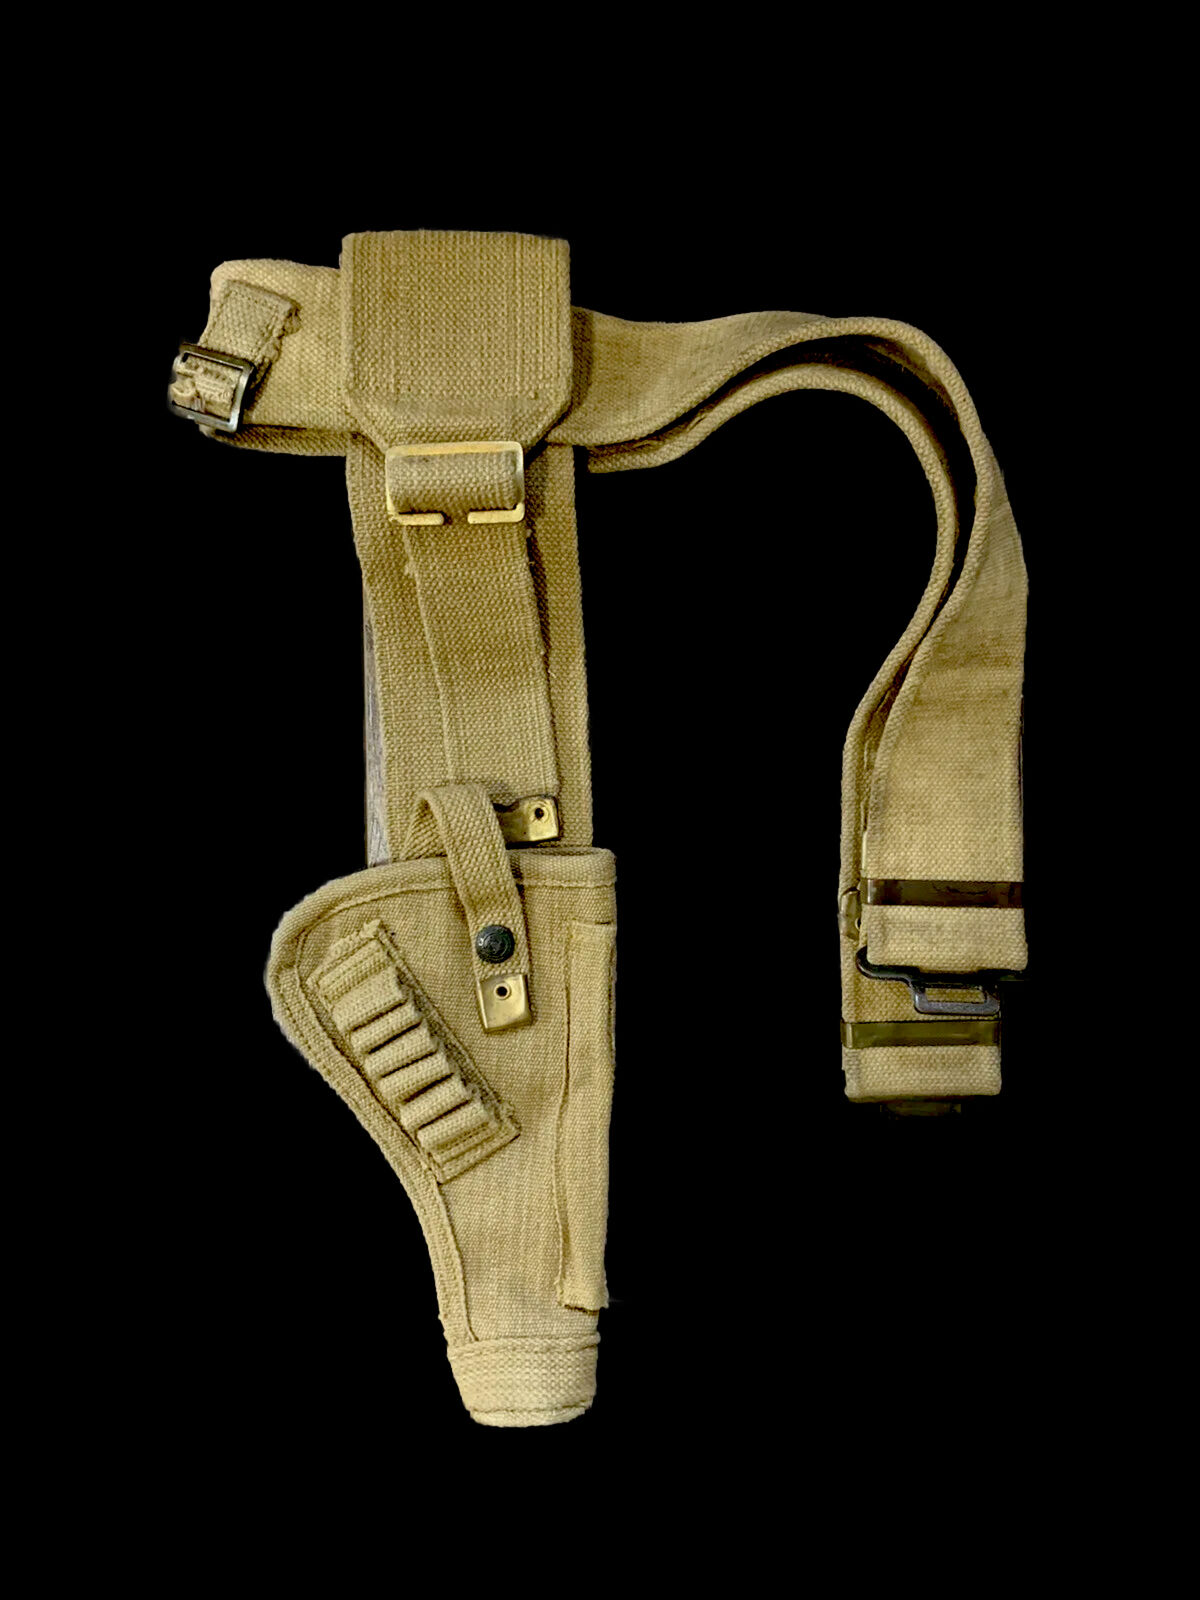 ww2 British Army Tanker .38 Webley Holster - 1942 With Belt Included.